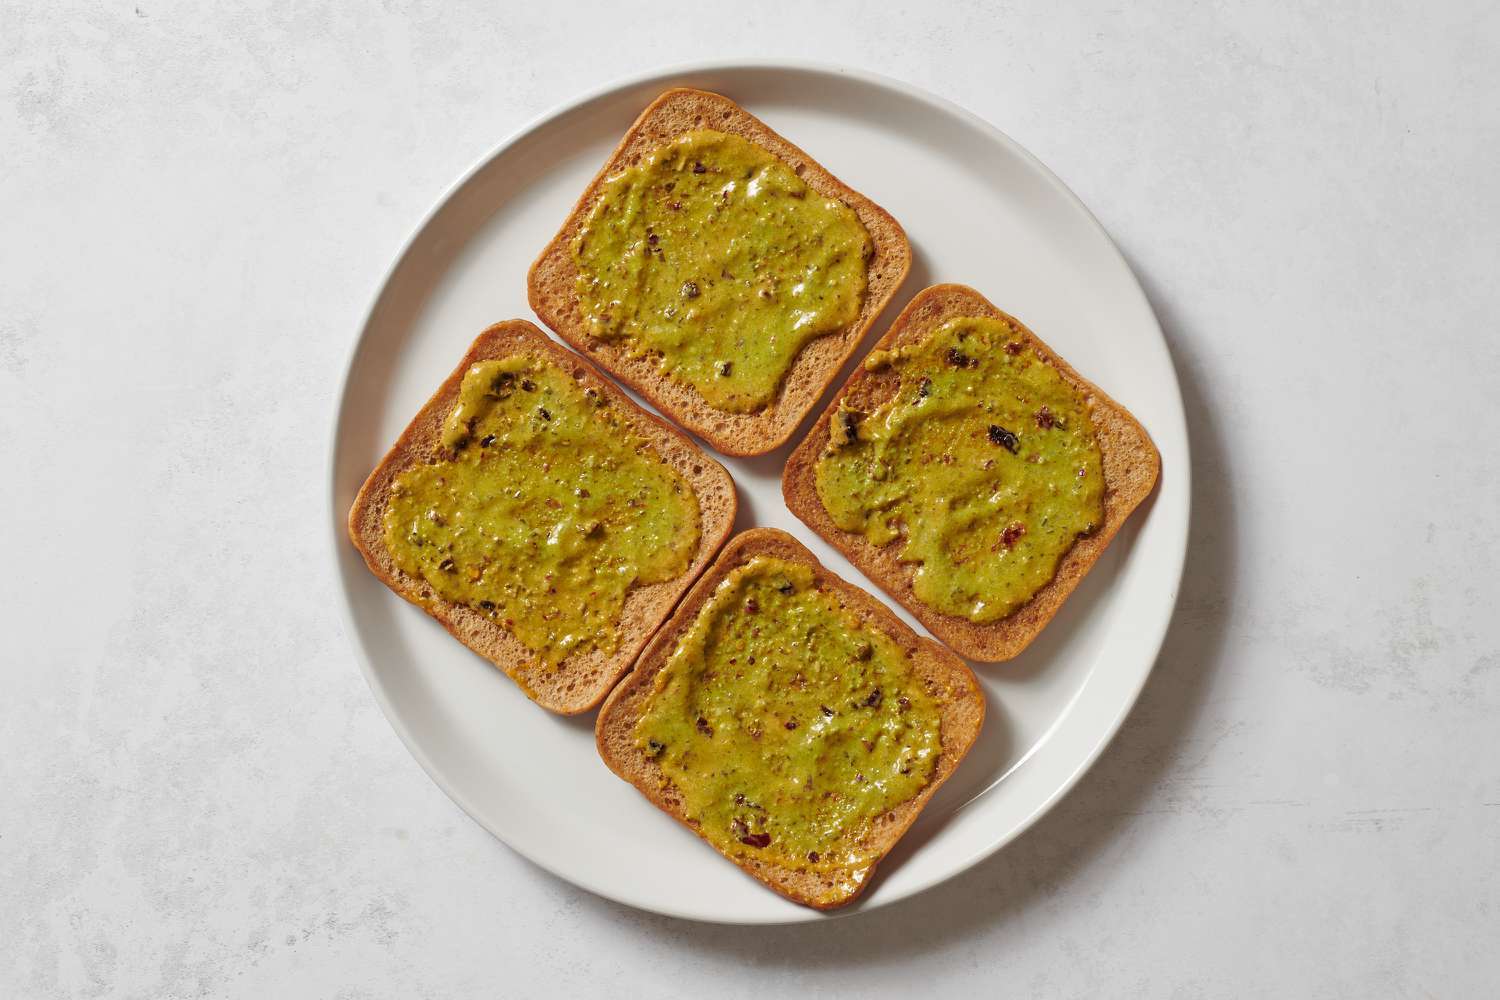 Four slices of bread topped with spicy pesto aioli